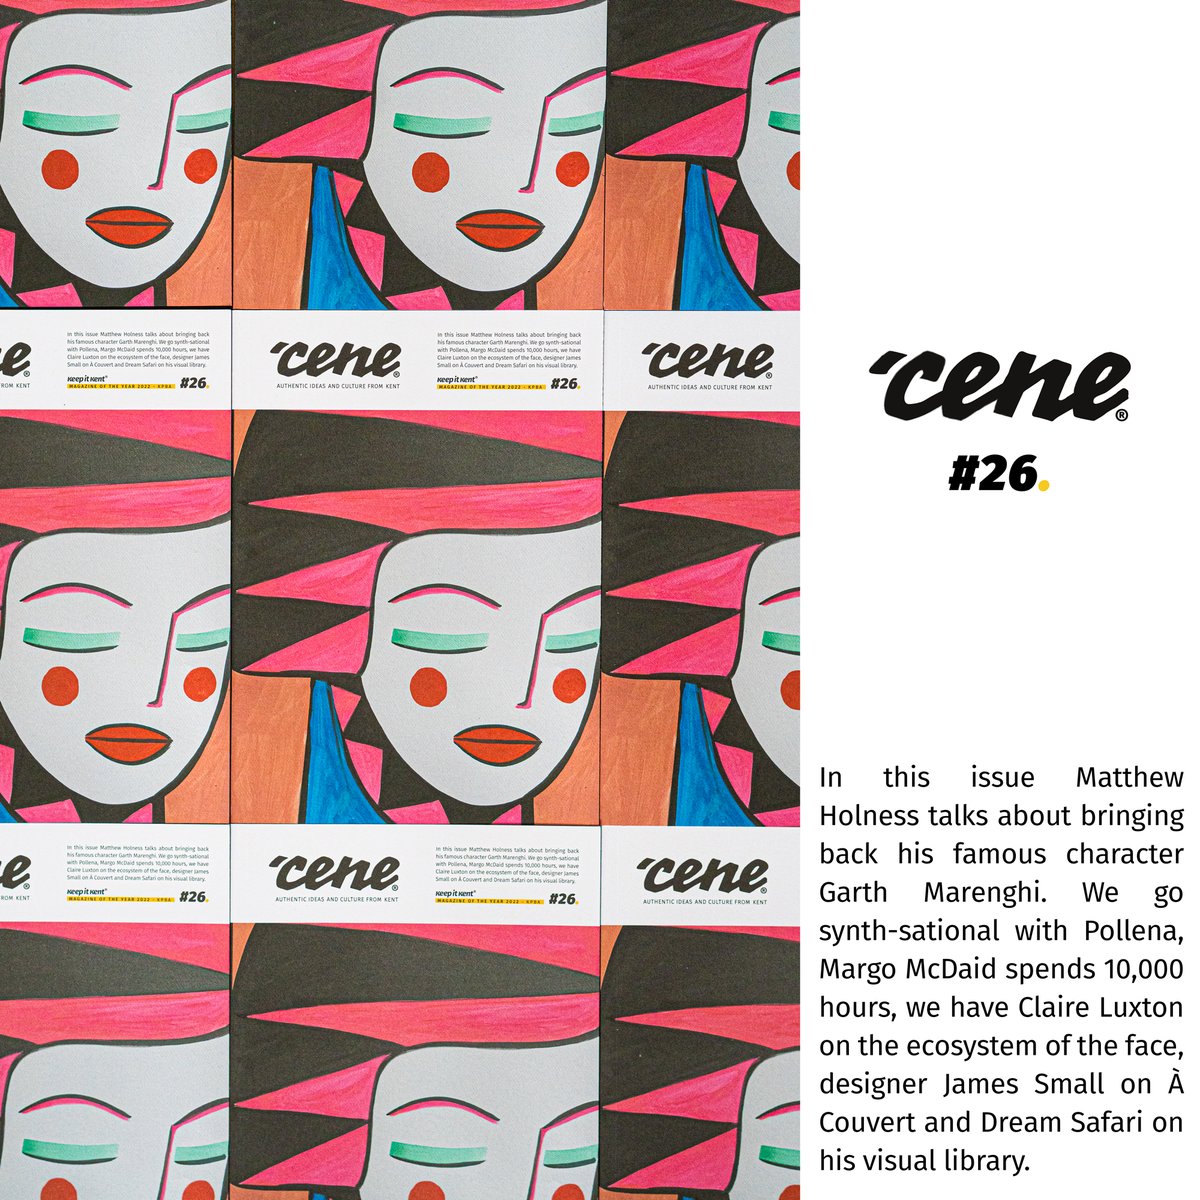 ISSUE #26 OUT NOW cenemagazine.co.uk/edition-26 @MrHolness talks about bringing back his most famous character. We go synth-sational with @pollenamusic , Margo In Margate spends 10,000 hours, designer James Small on @a_couvert .. plus much more #keepitkent #cenemag #kent #culture